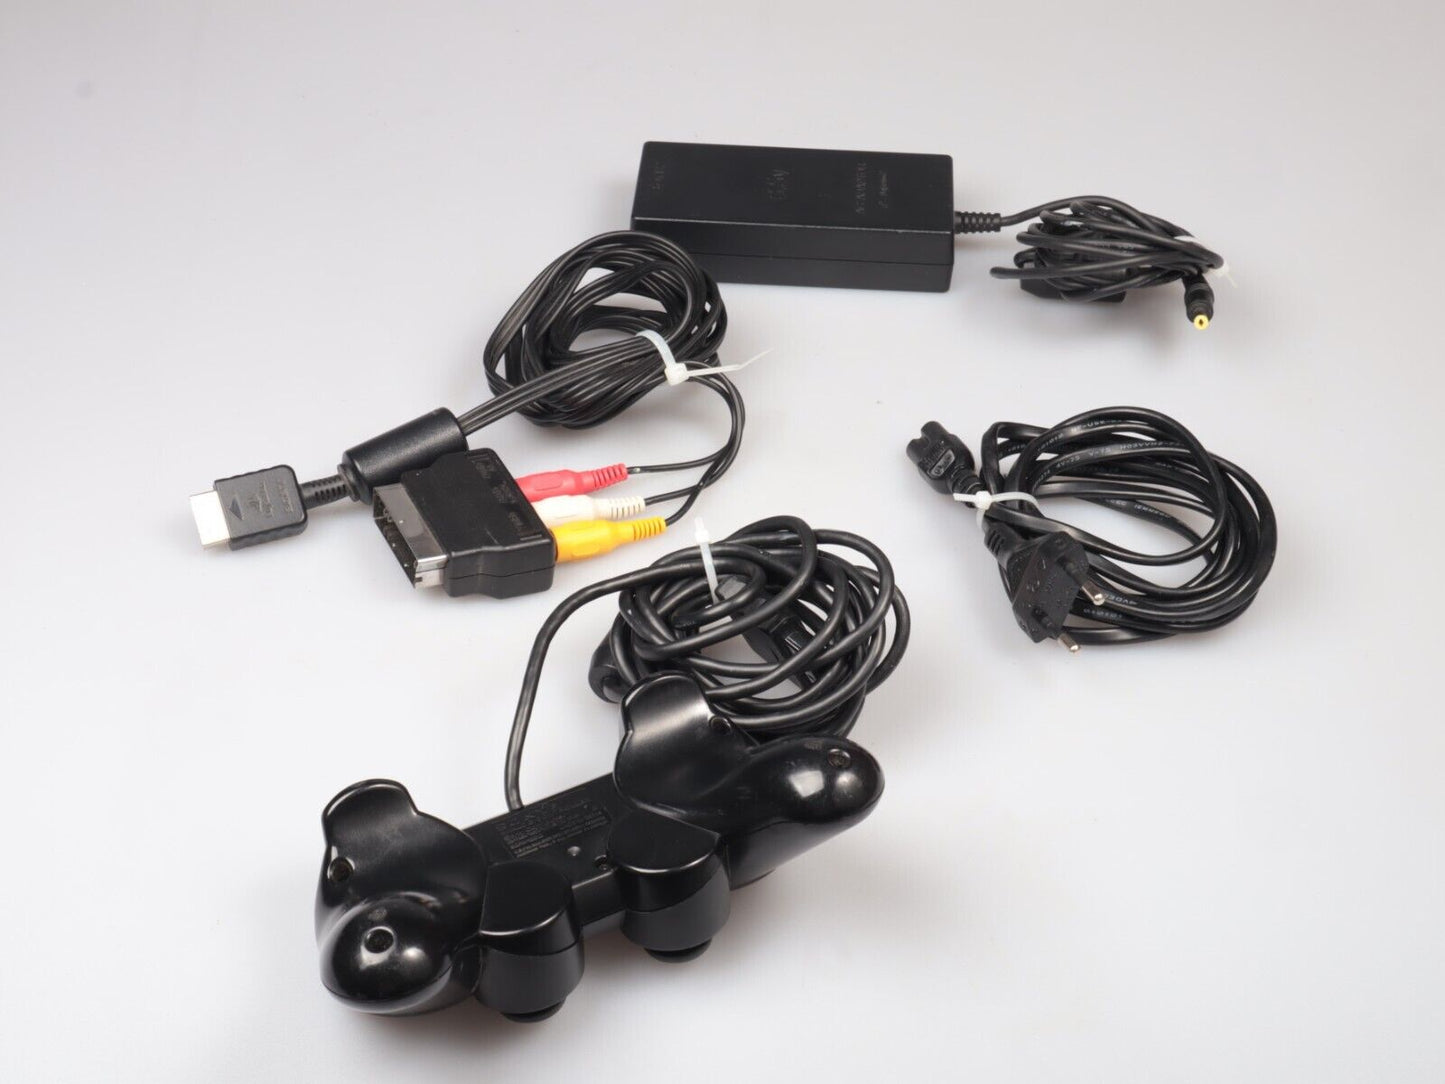 PlayStation 2 | Slim SCPH-70004 Black | Controller & Cables